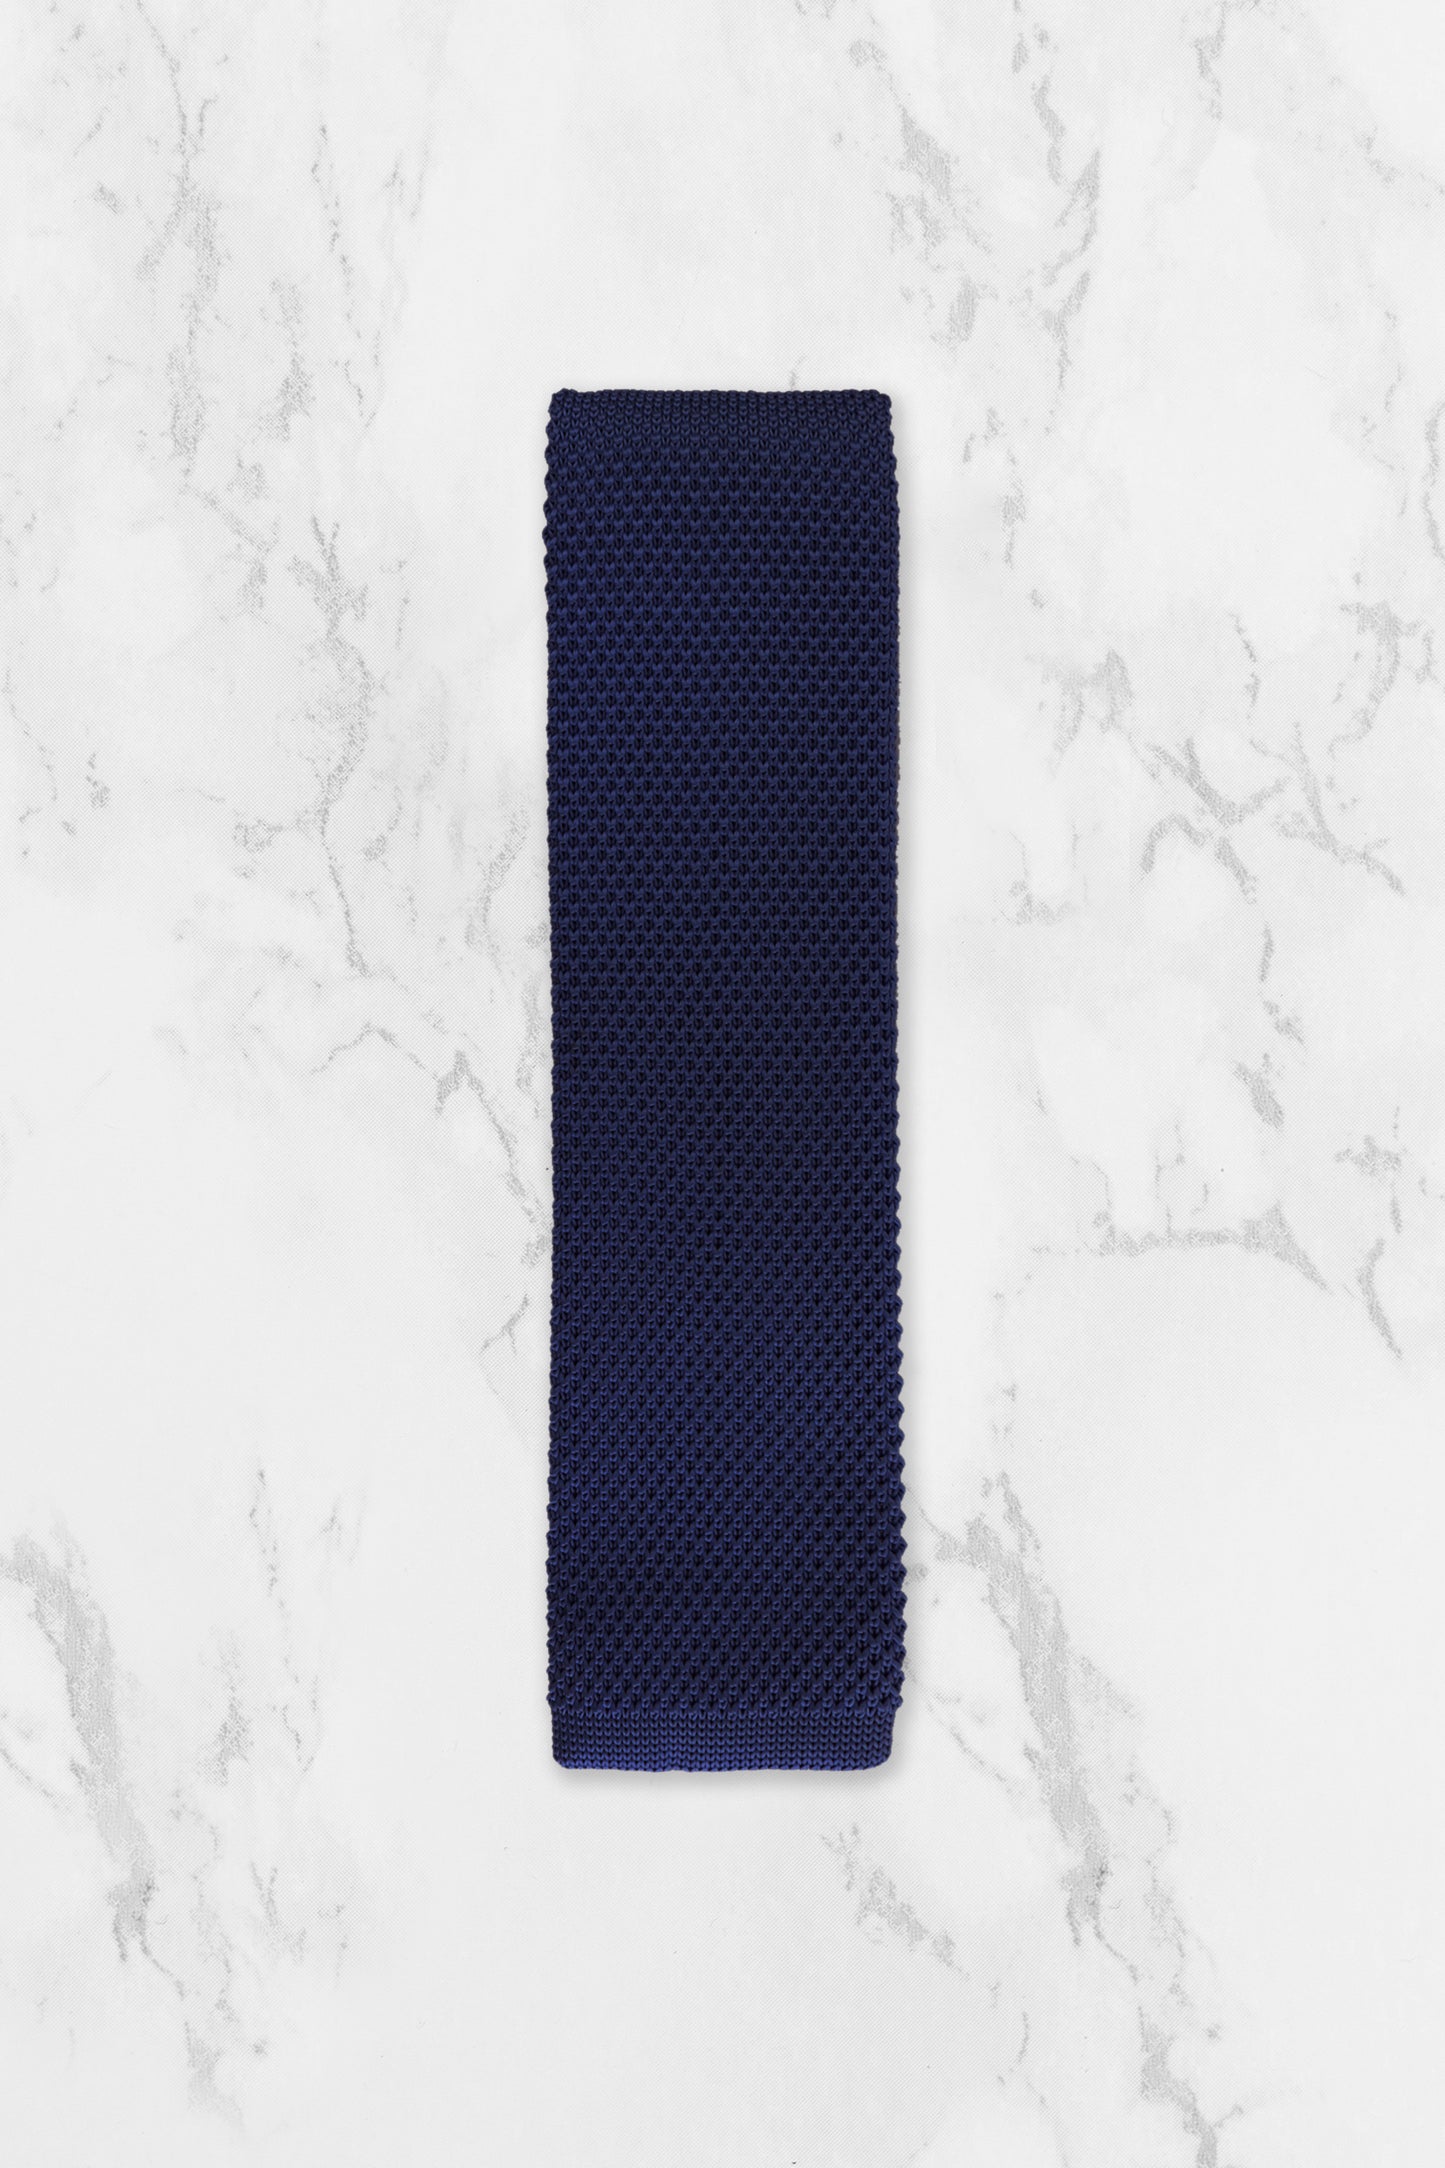 100% Polyester Diamond End Knitted Tie - Navy Blue